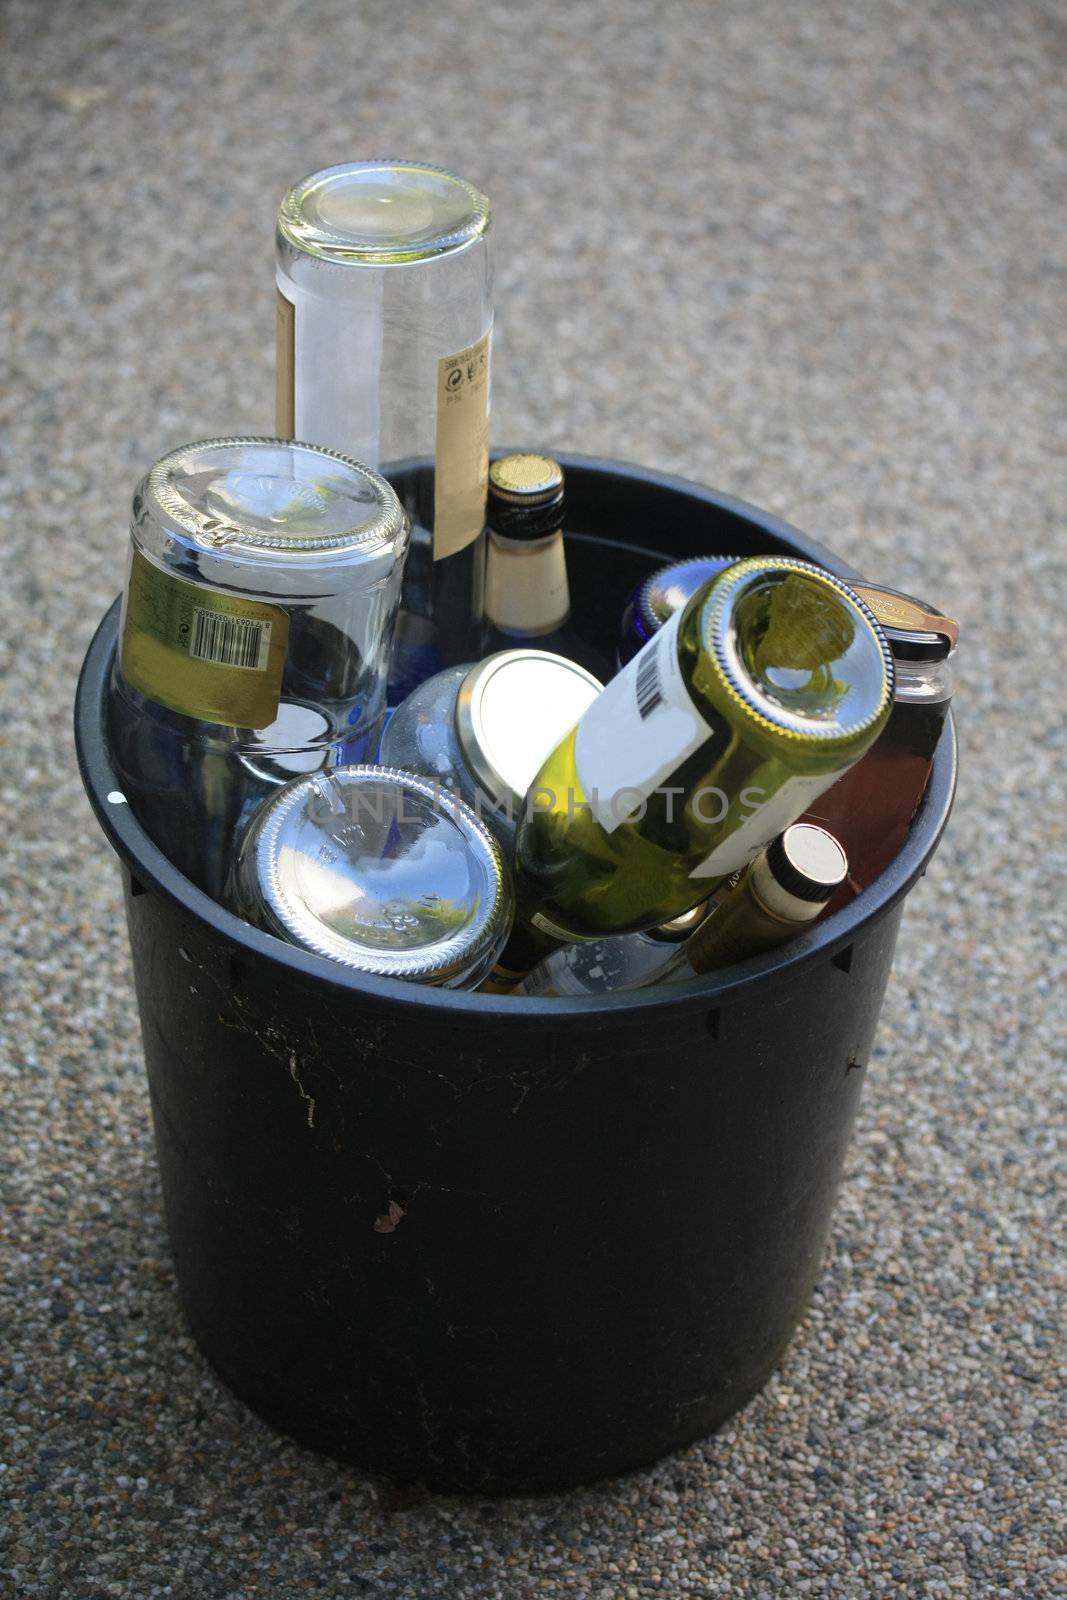 A bucket filled with empty bottles